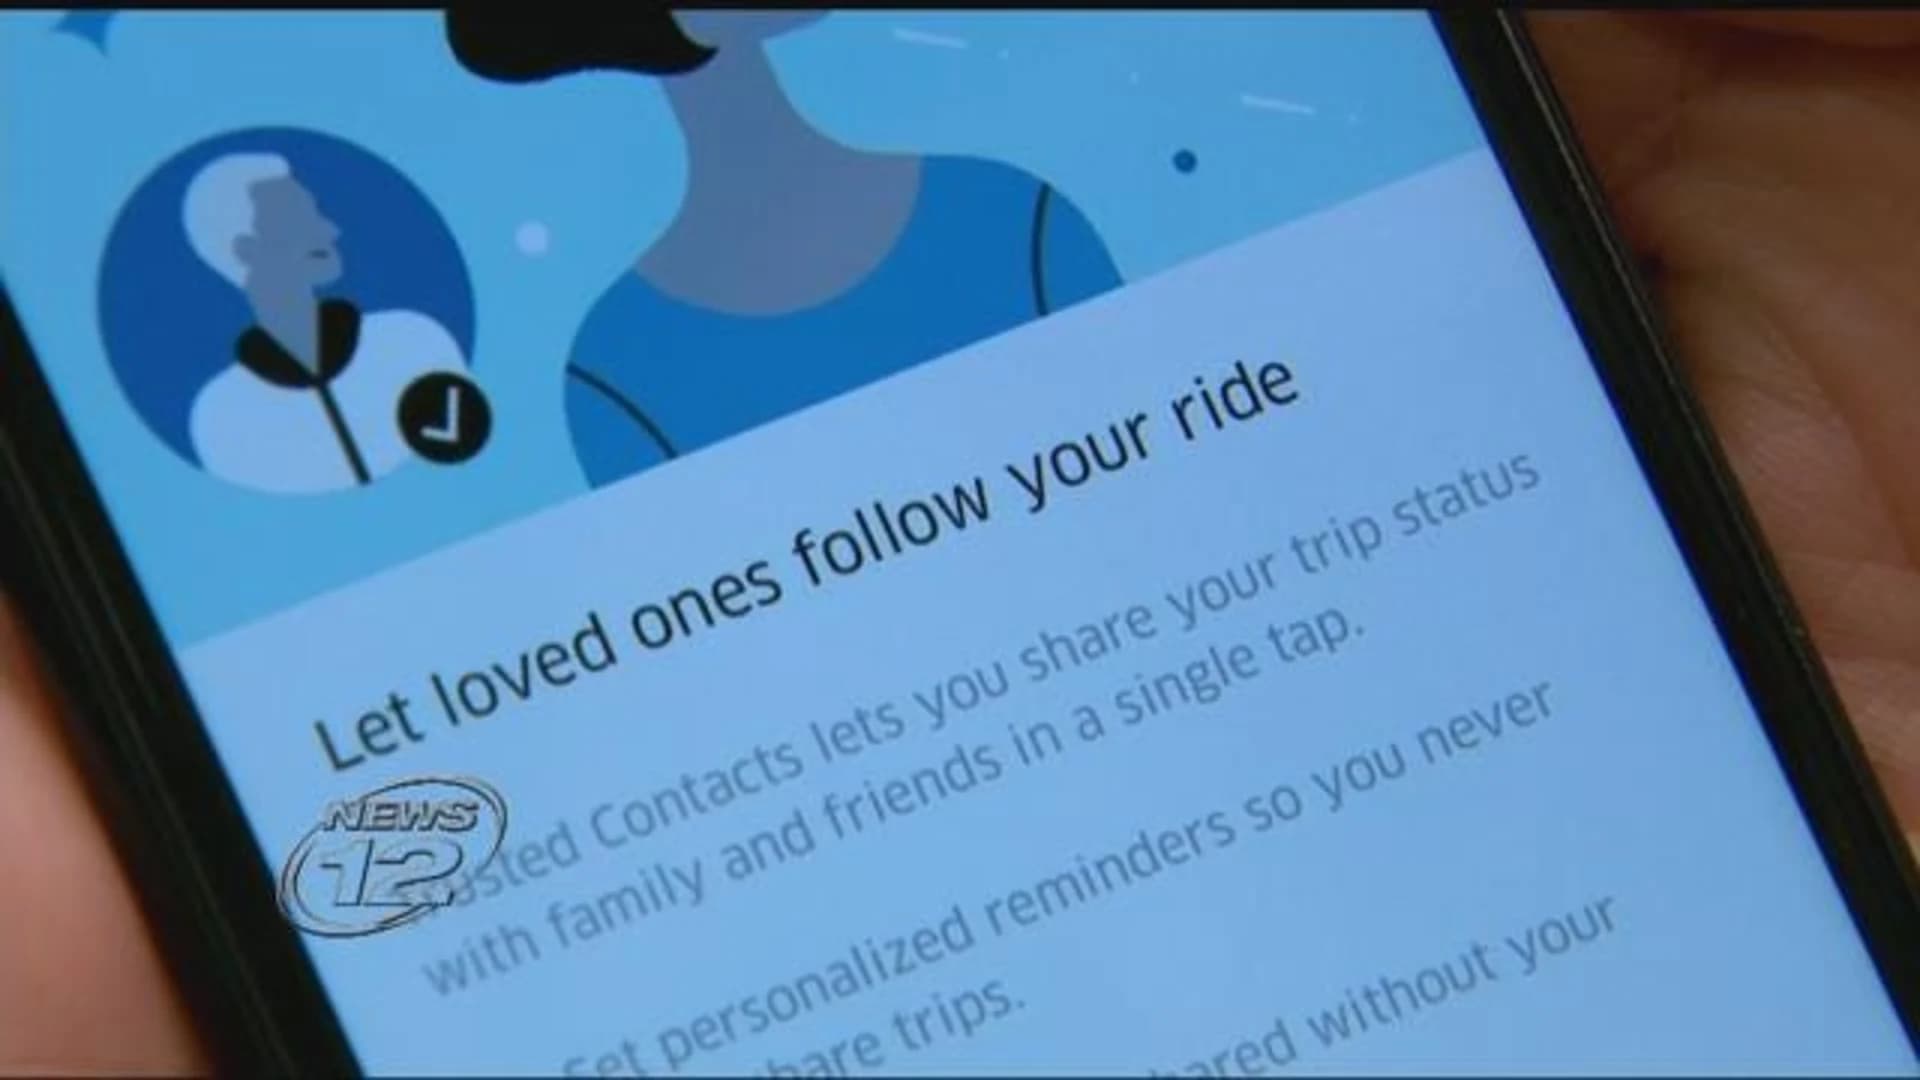 Uber safety concerns hit Pace campus in wake of college student's murder